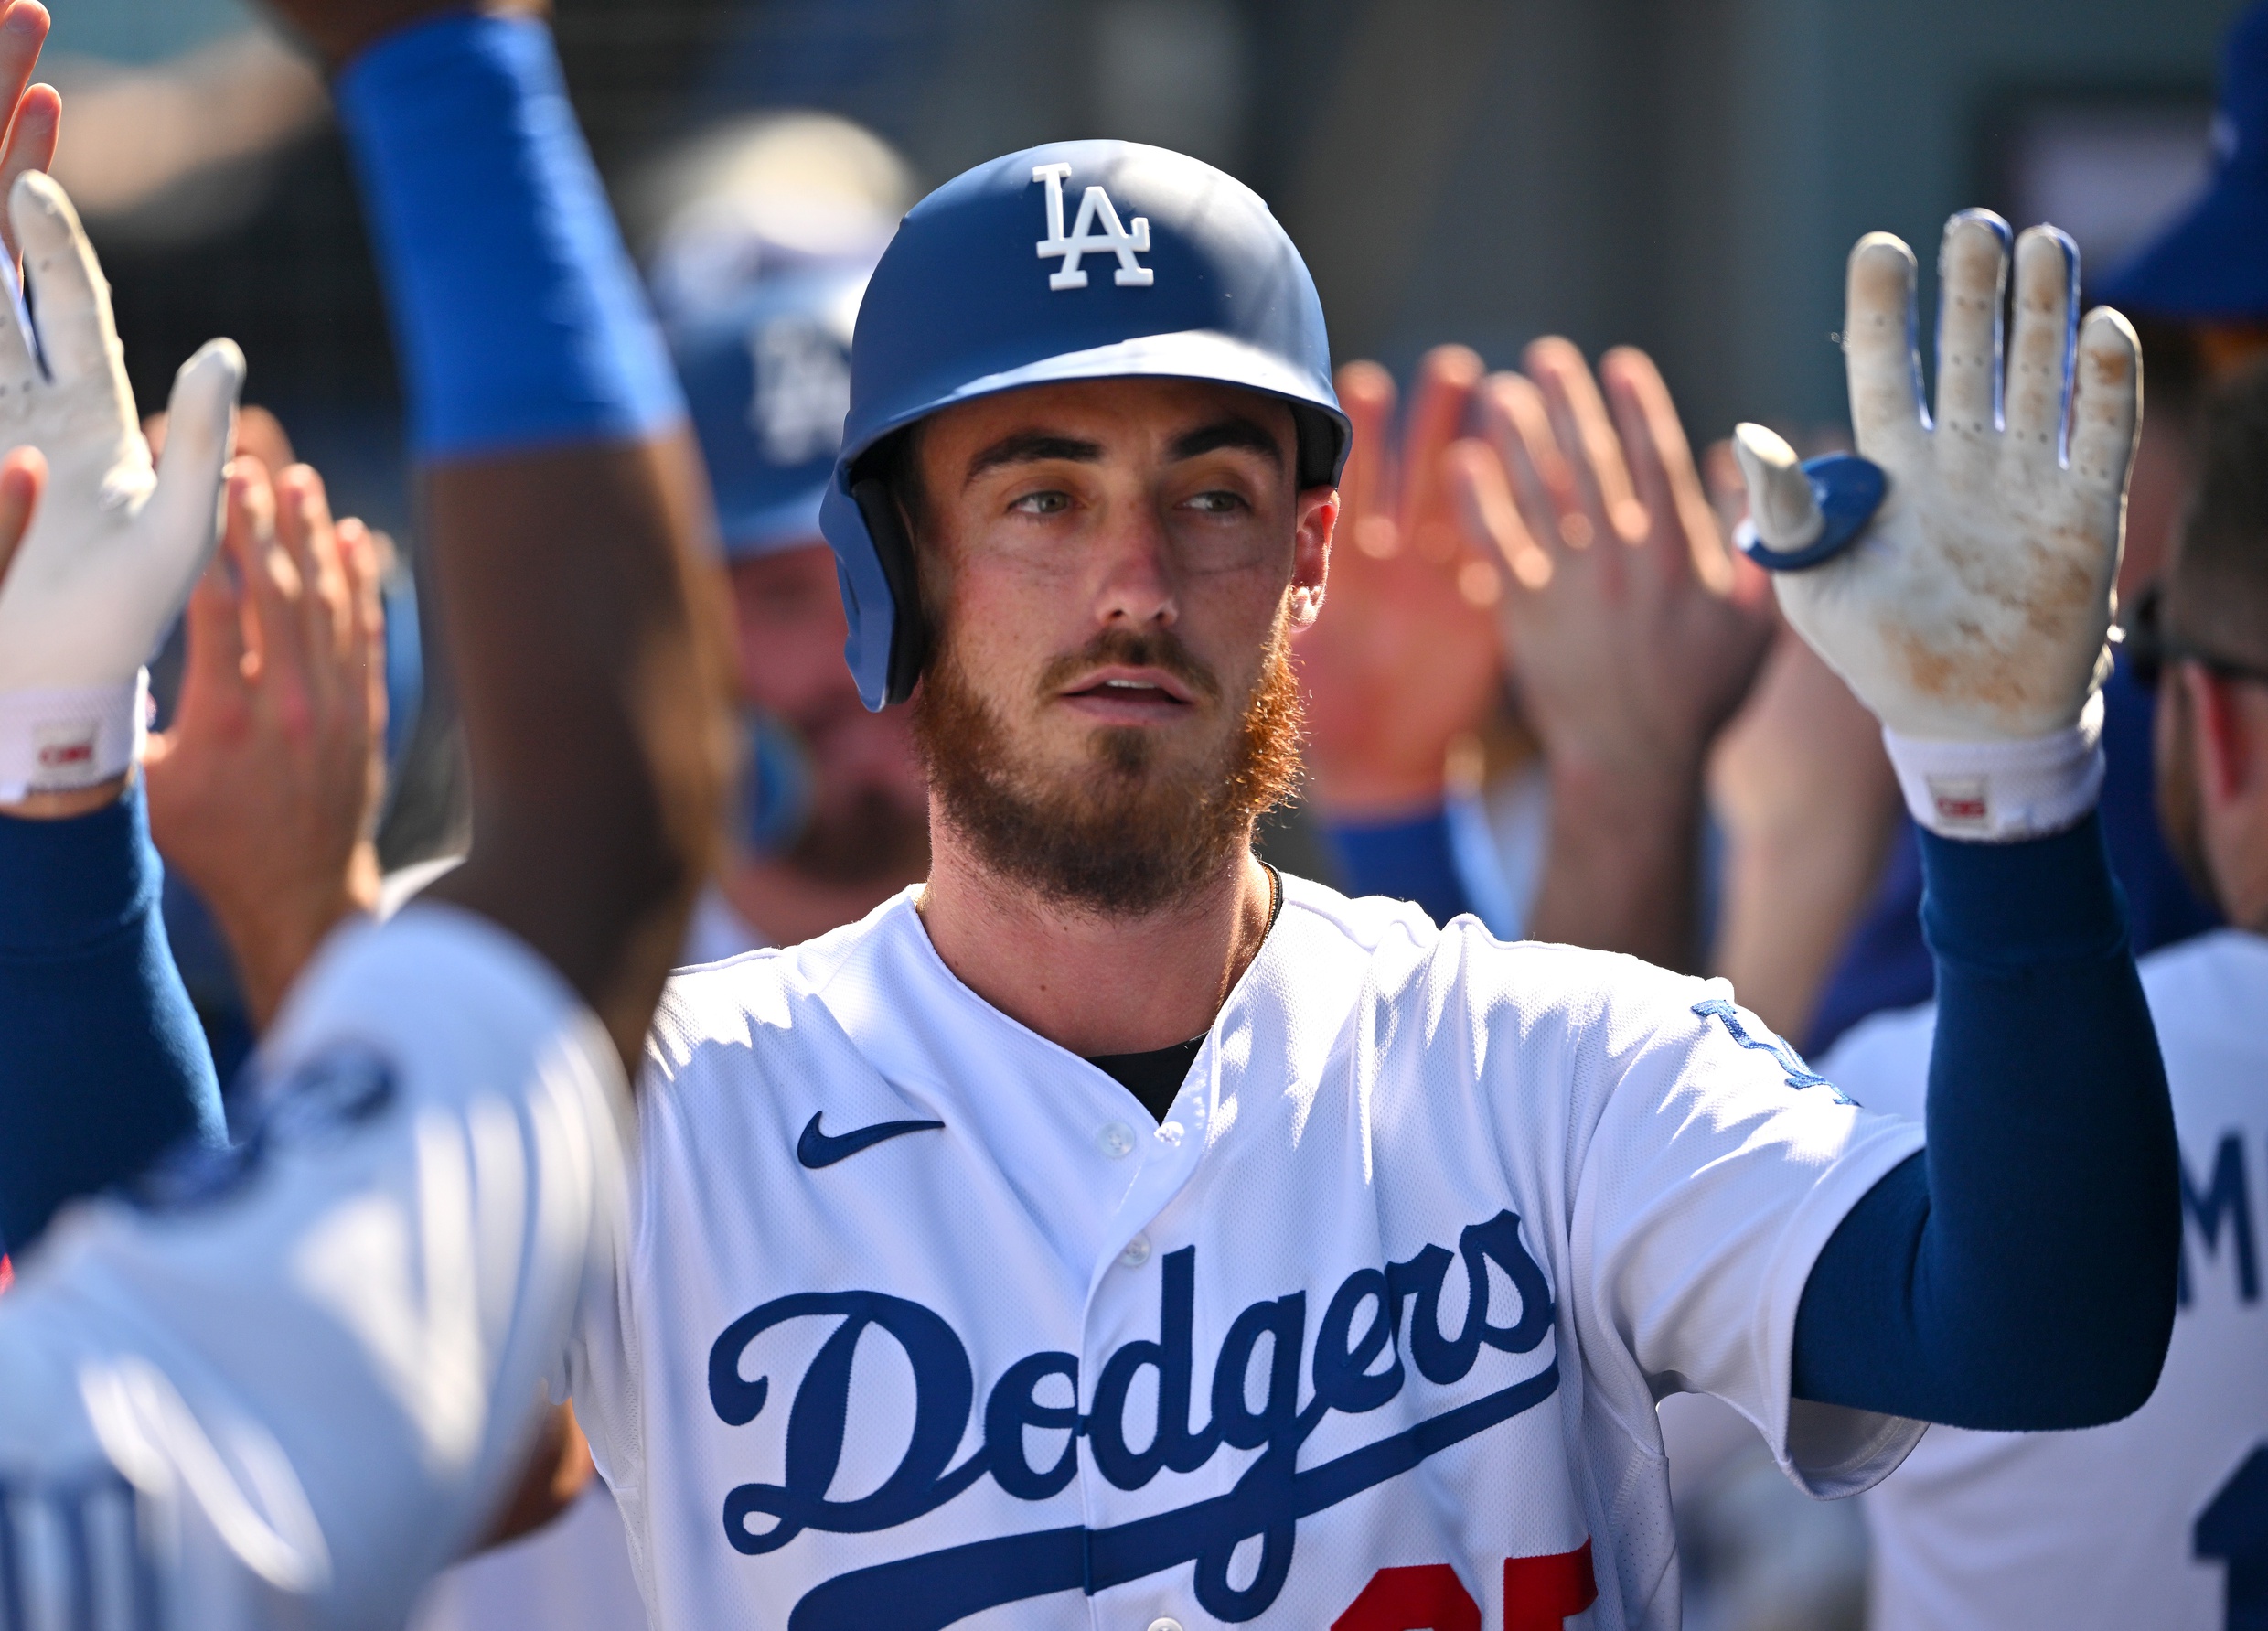 Dodgers: Cody Bellinger Posts a Farewell to LA, Fans on Social